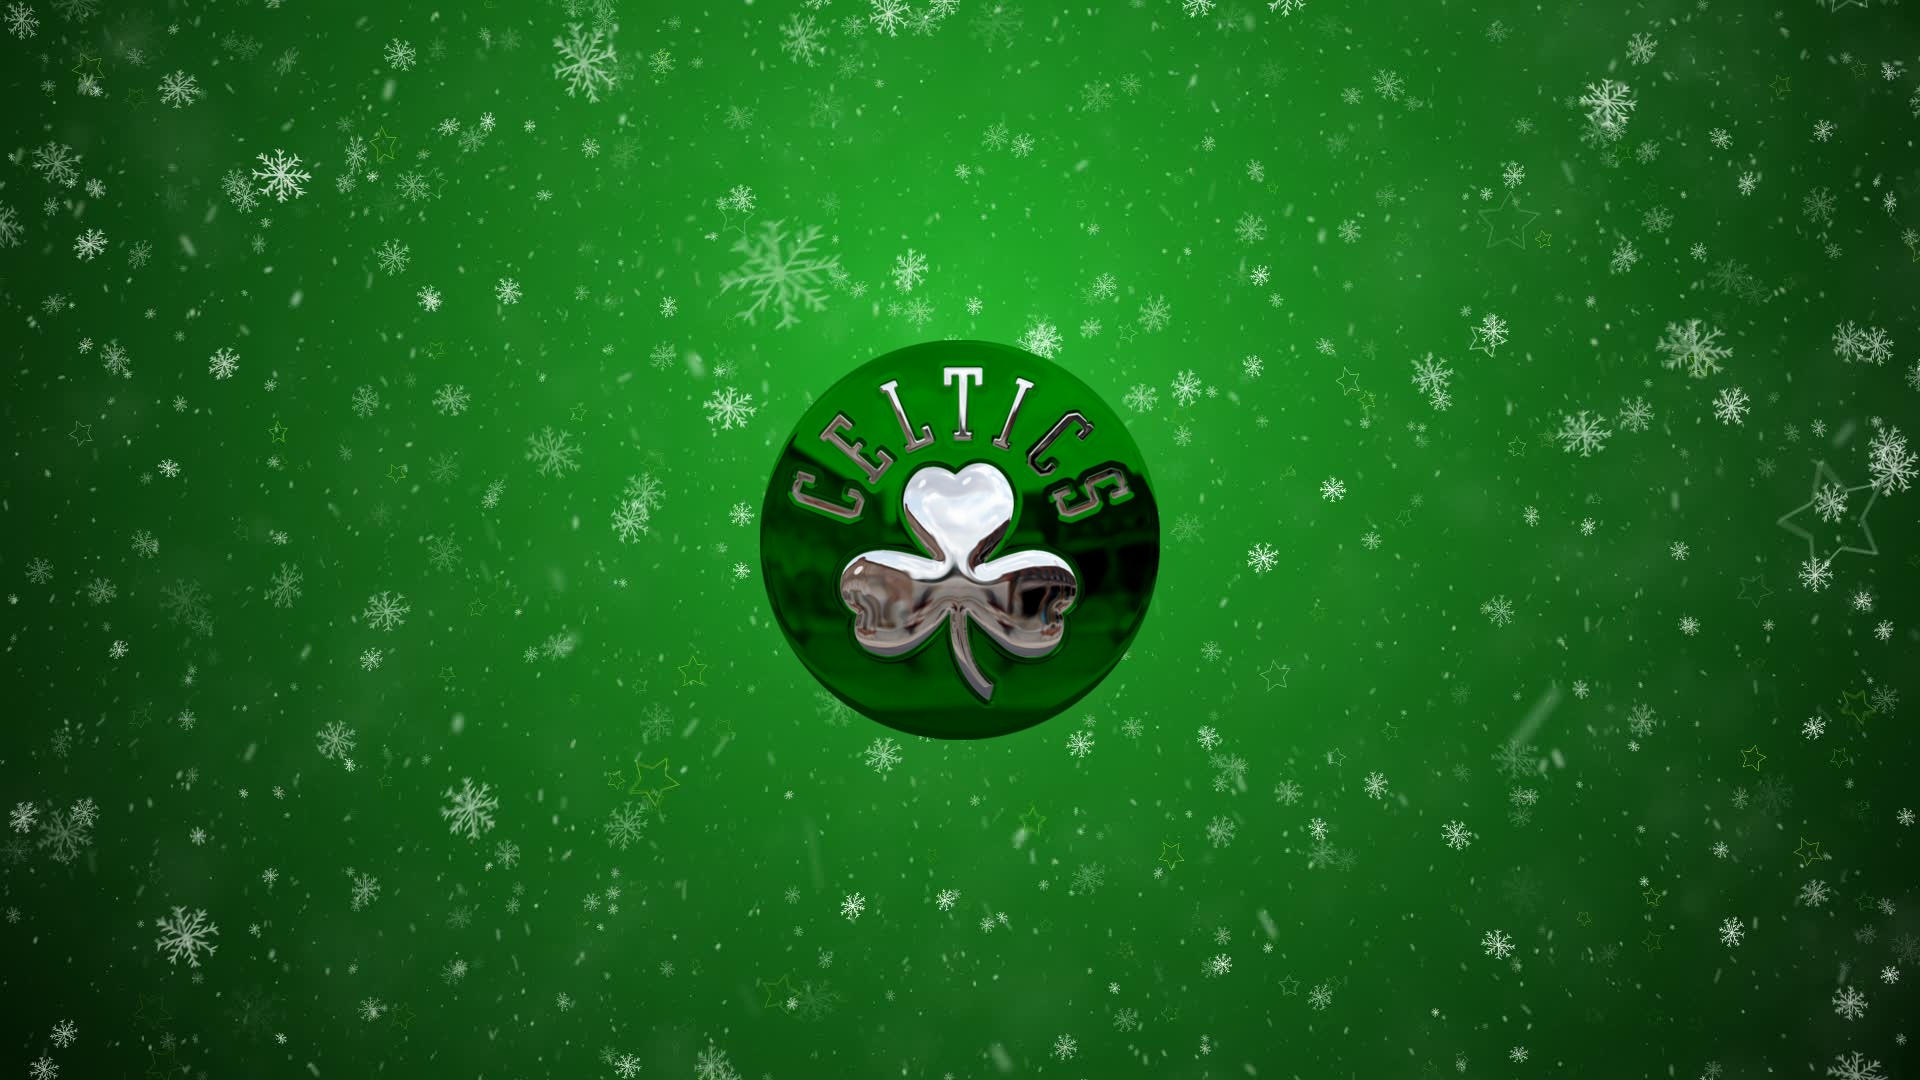 Boston Celtics Logo For Mac Wallpaper with image dimensions 1920x1080 pixel. You can make this wallpaper for your Desktop Computer Backgrounds, Windows or Mac Screensavers, iPhone Lock screen, Tablet or Android and another Mobile Phone device